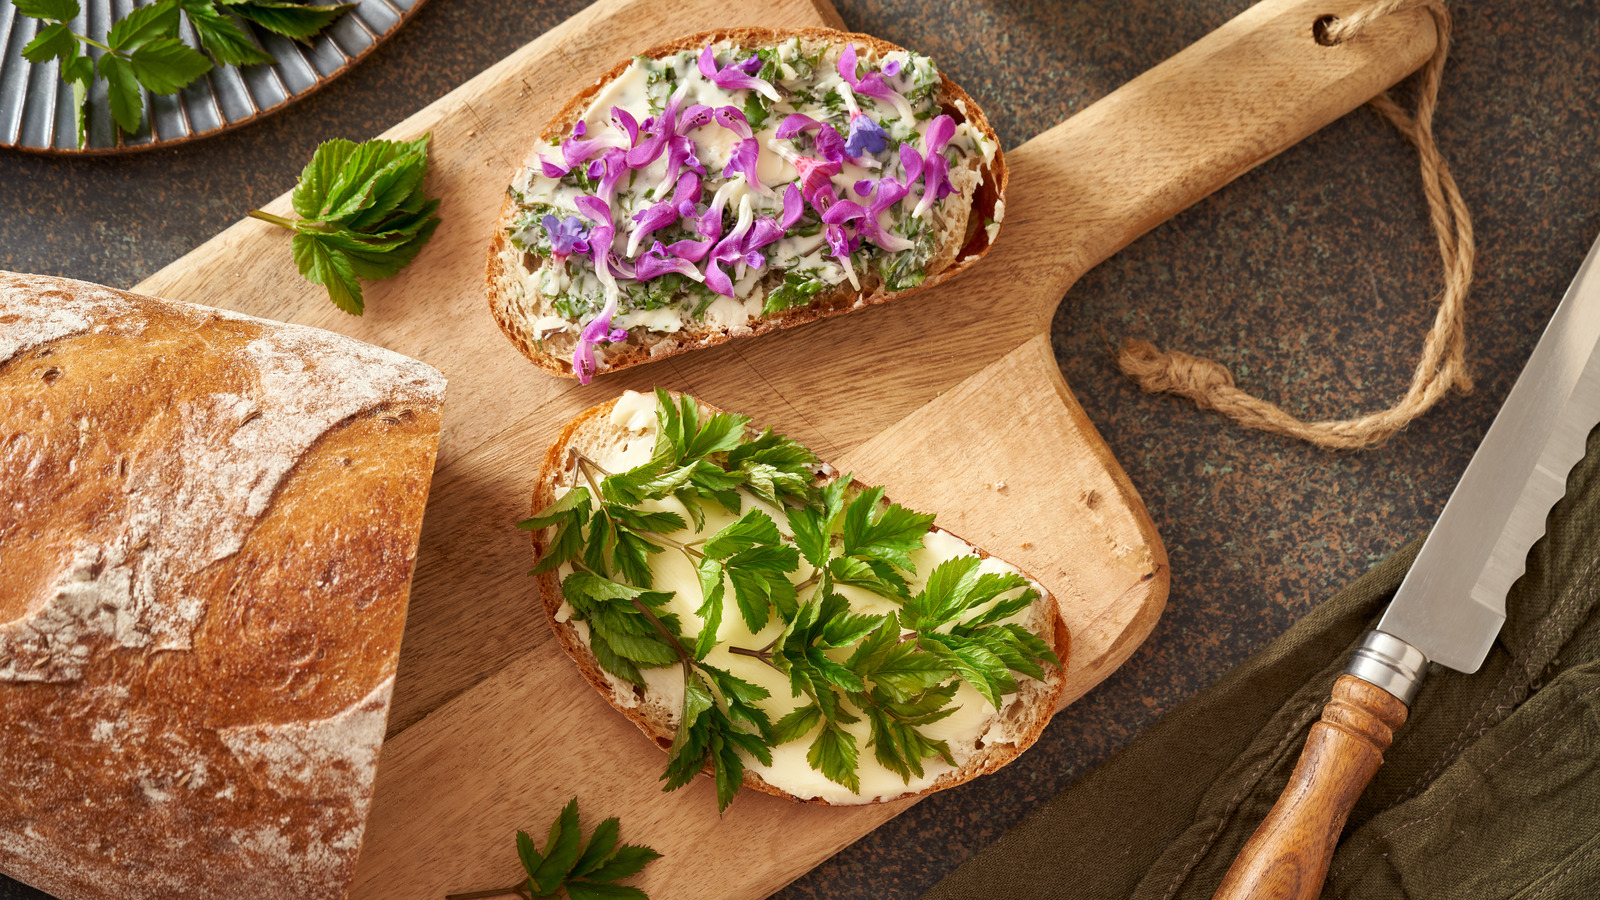 For A Crowd-Pleasing Appetizer, Whip Up A Sourdough And Butter Board